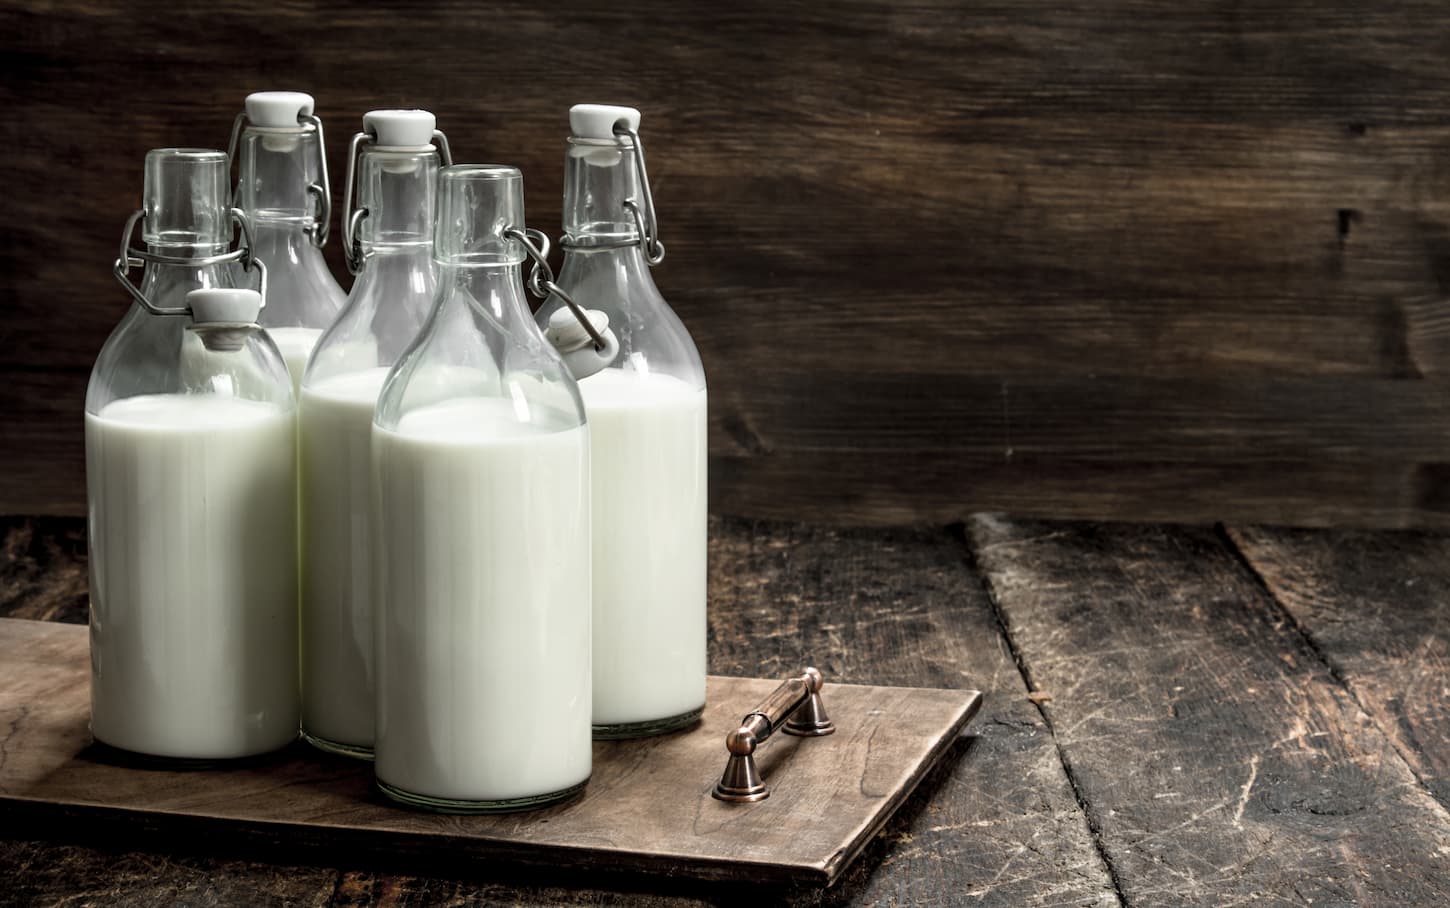 An image of Bottles with fresh milk.